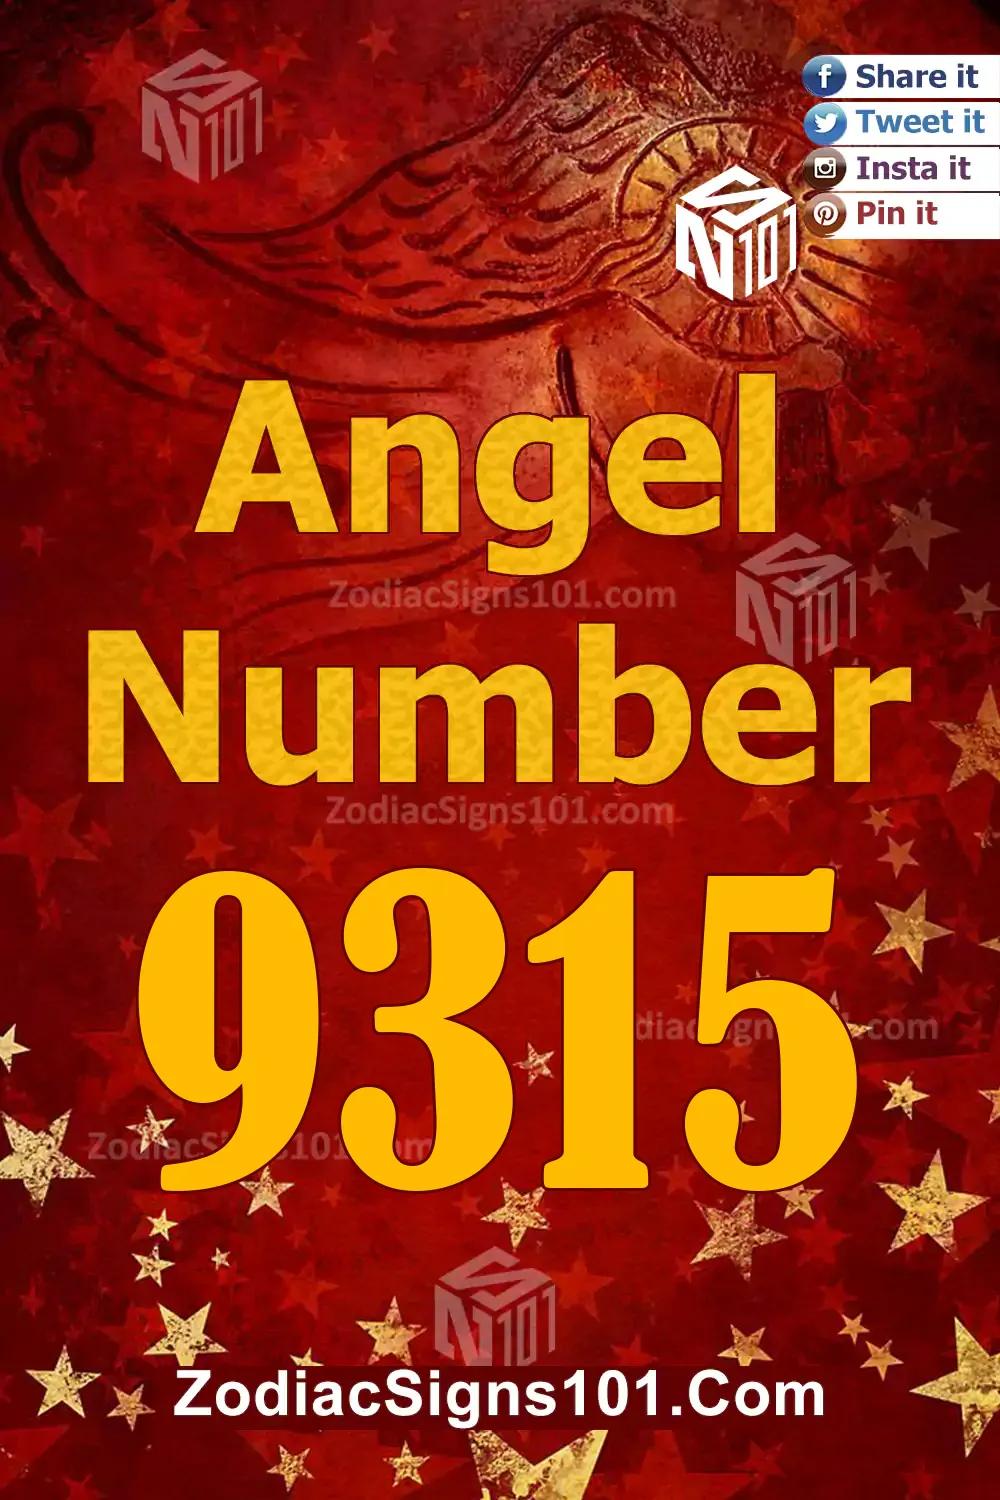 9315 Angel Number Meaning